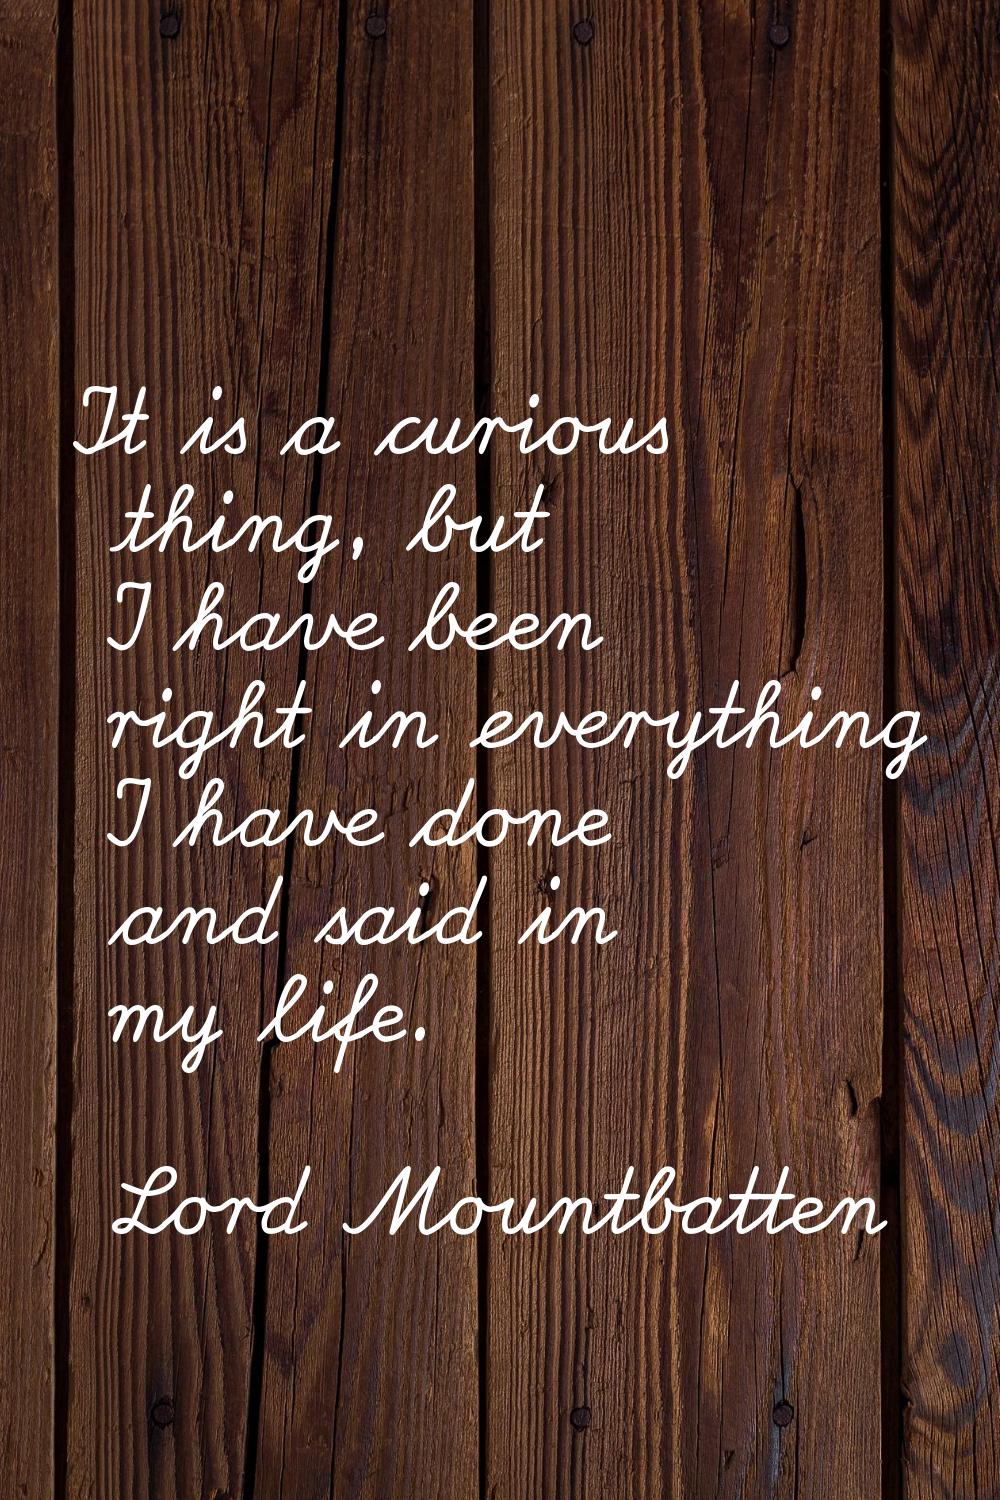 It is a curious thing, but I have been right in everything I have done and said in my life.